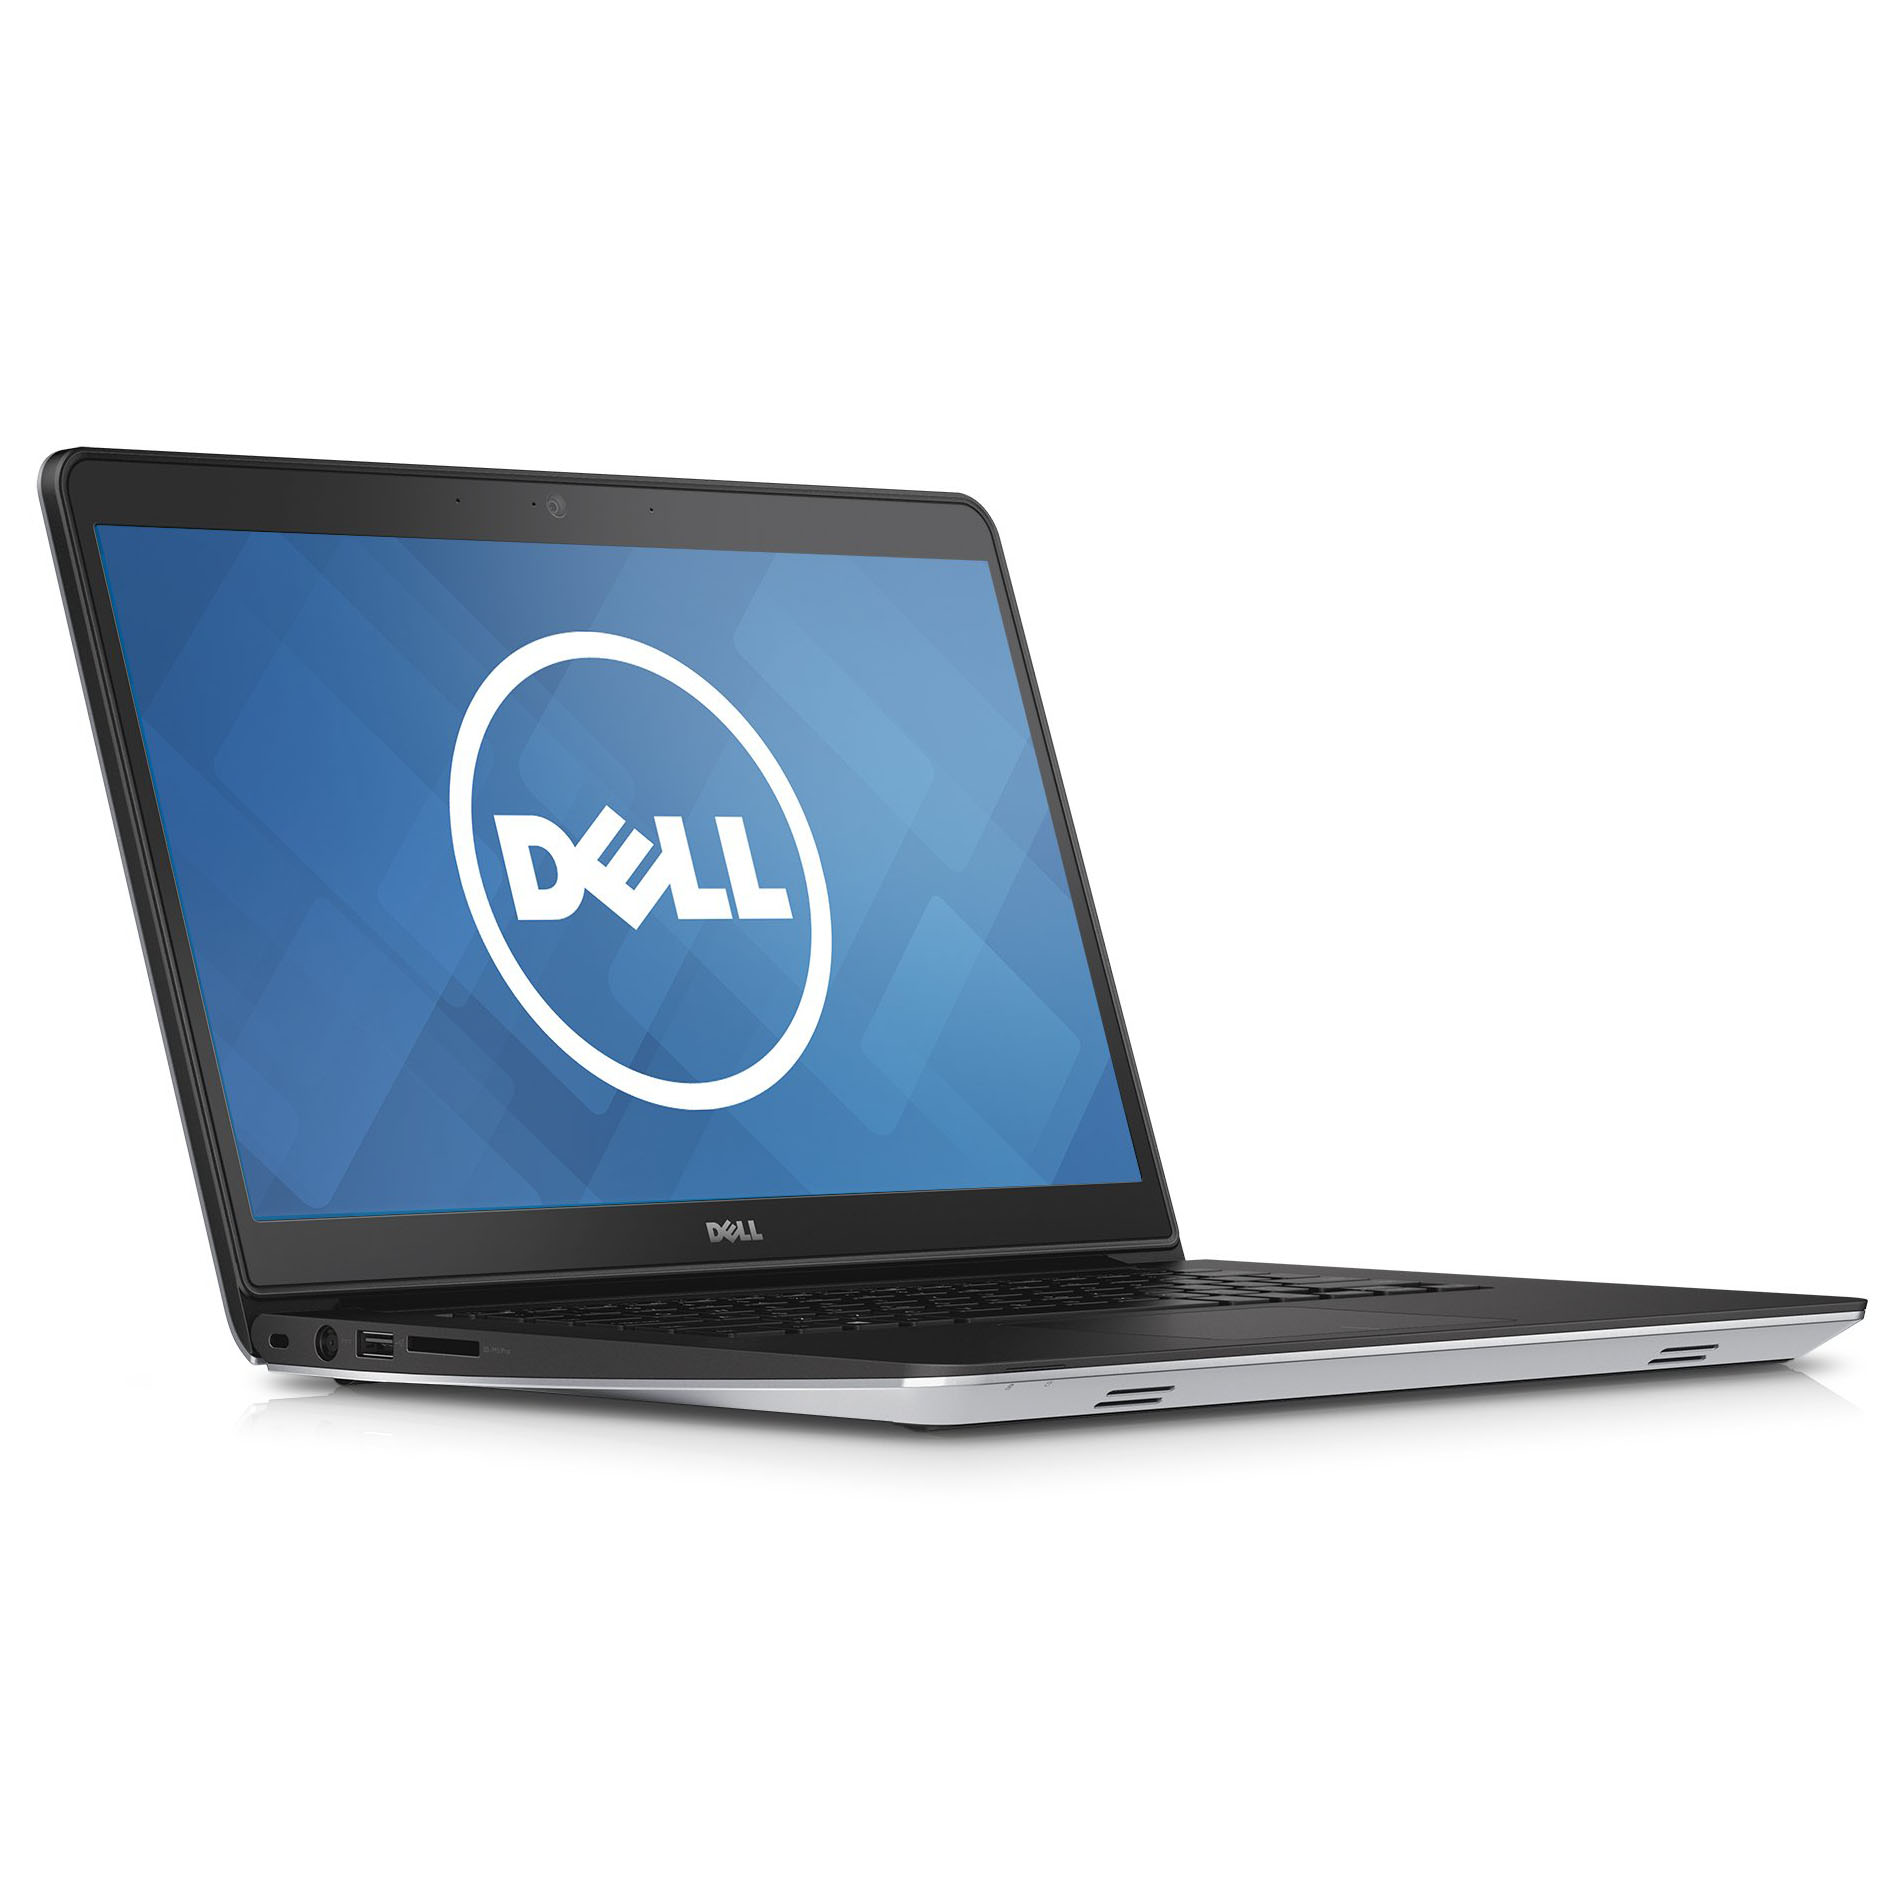 Dell Inspiron 14 5452 Notebook